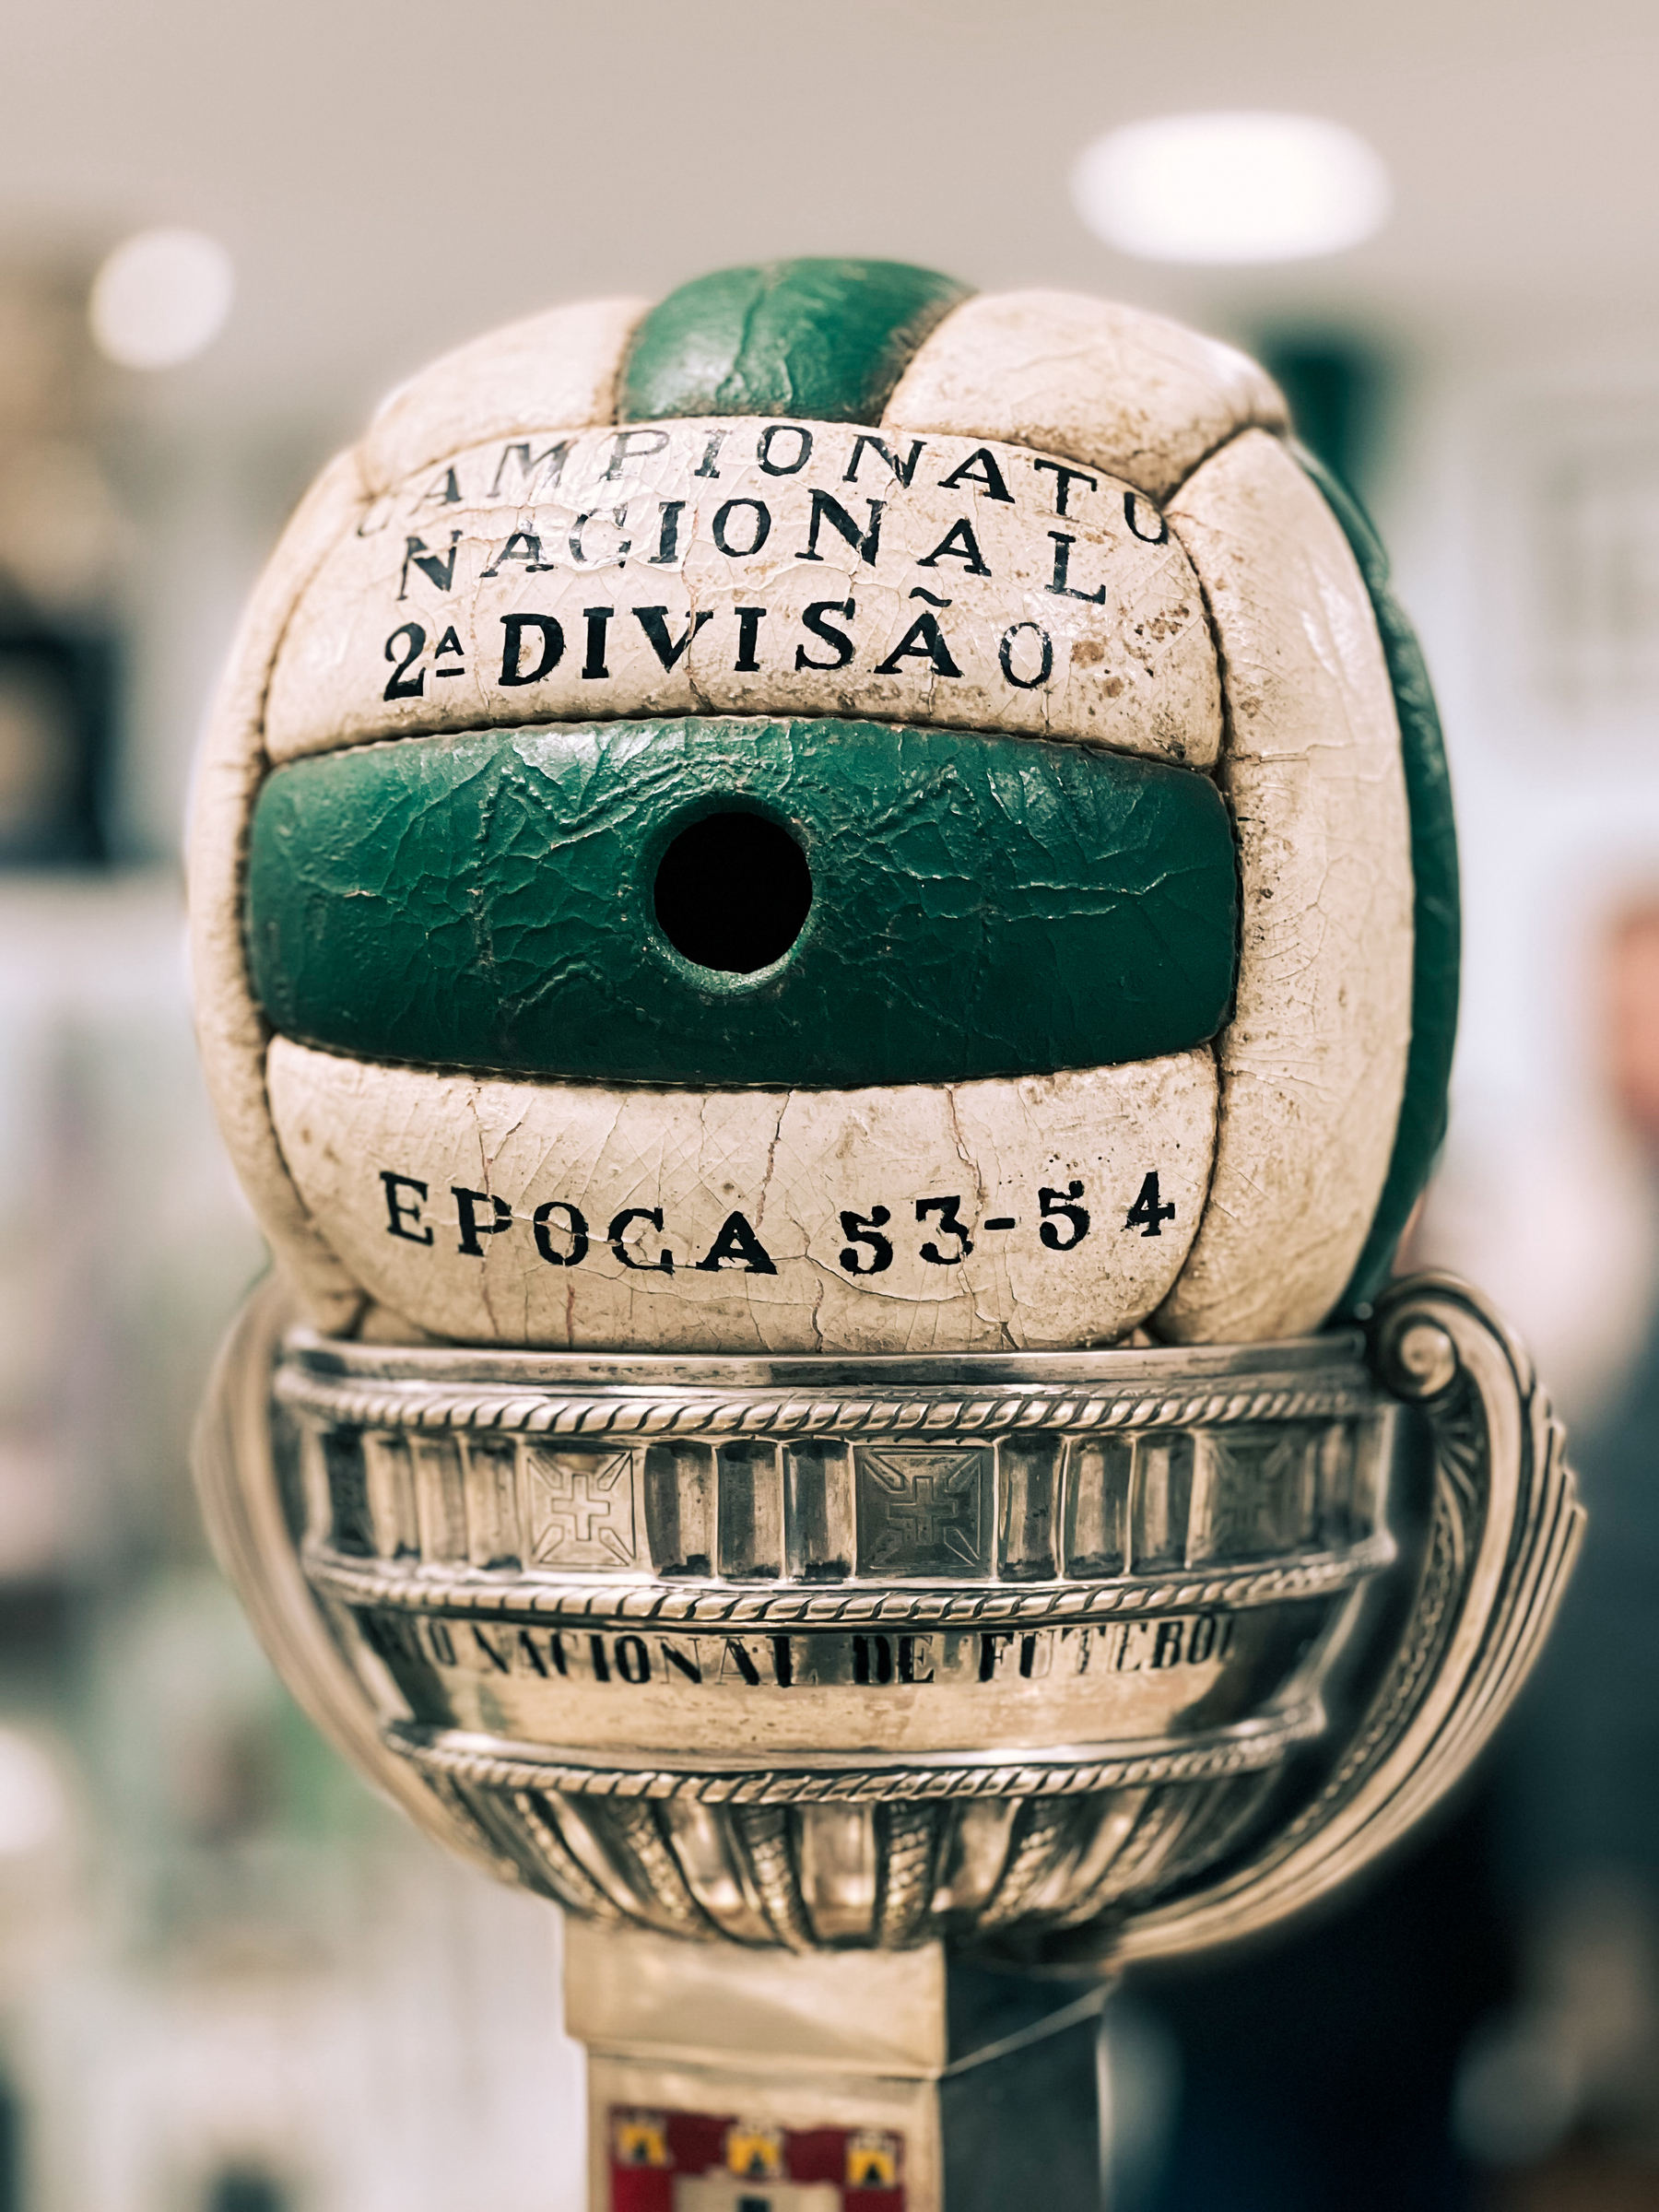 A close-up of a vintage leather soccer ball mounted on top of a trophy.